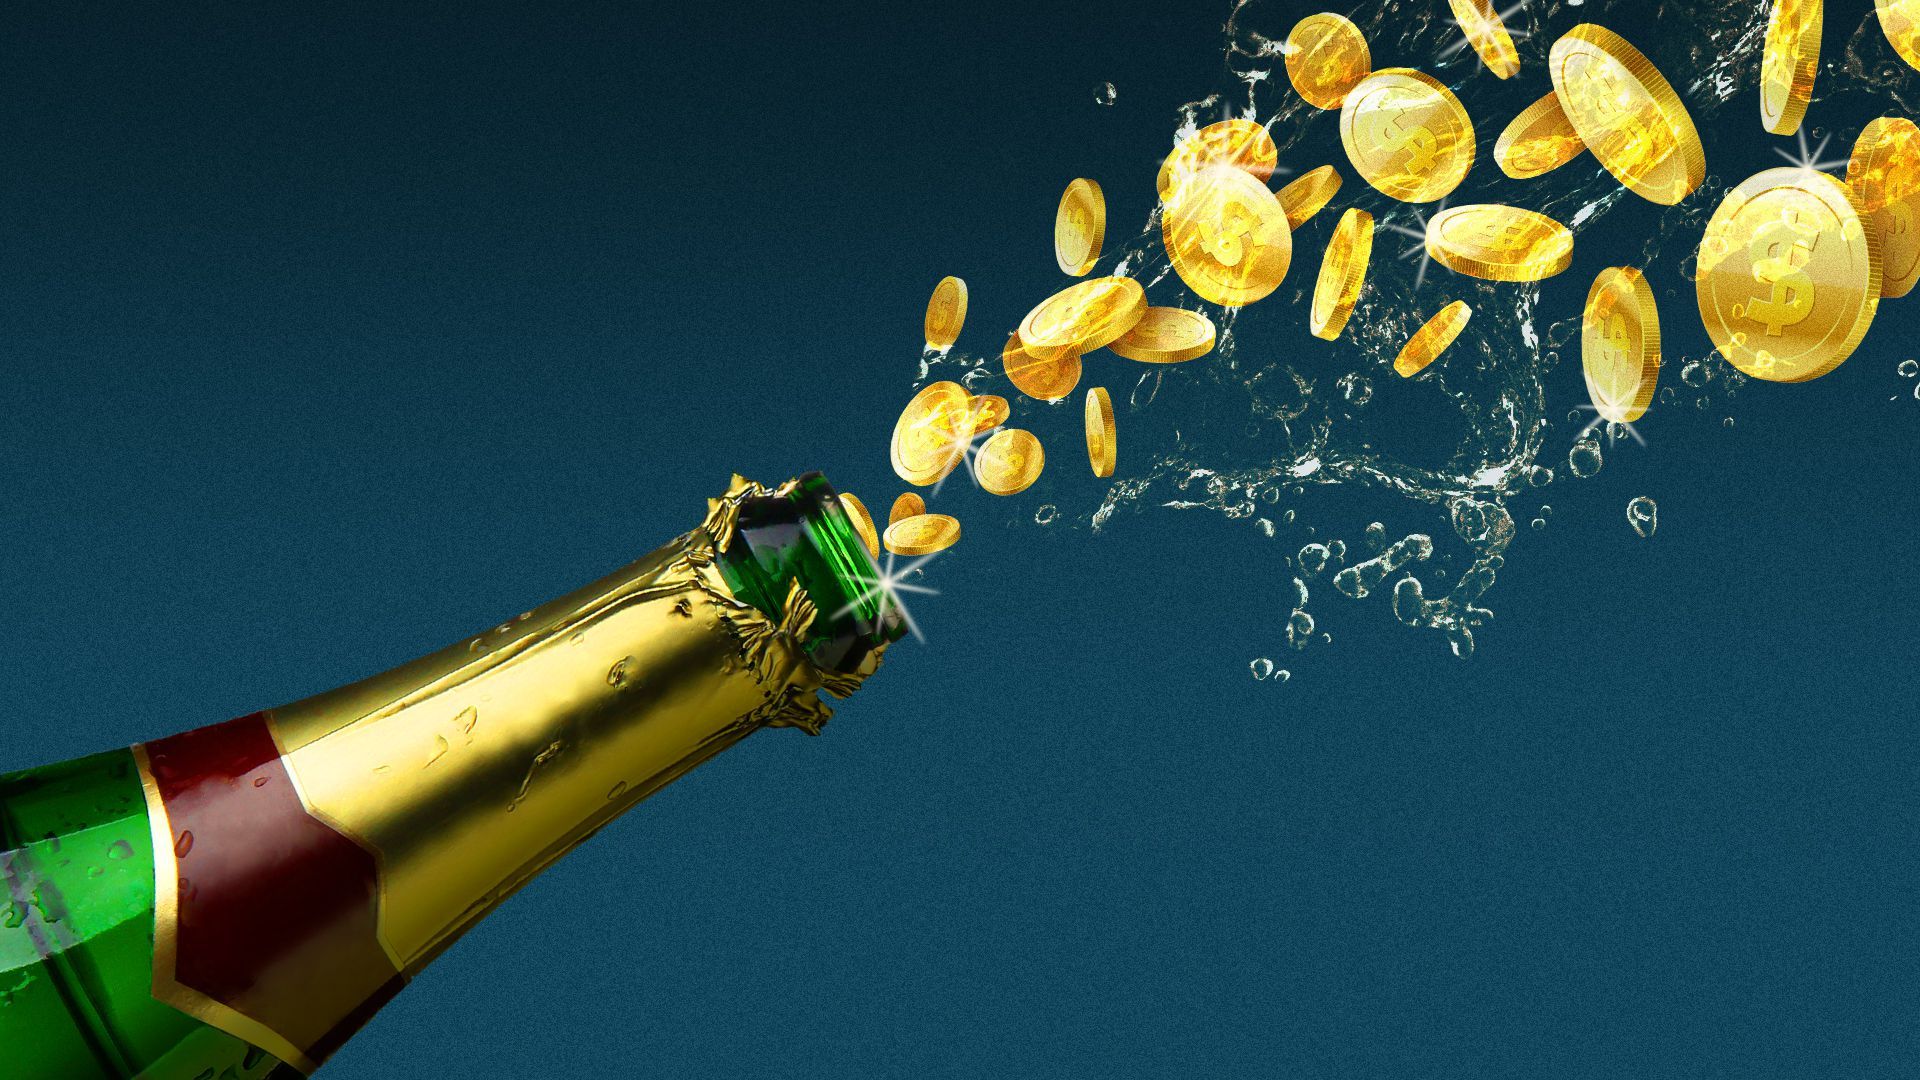 Illustration of coins flowing out of a champagne bottle.